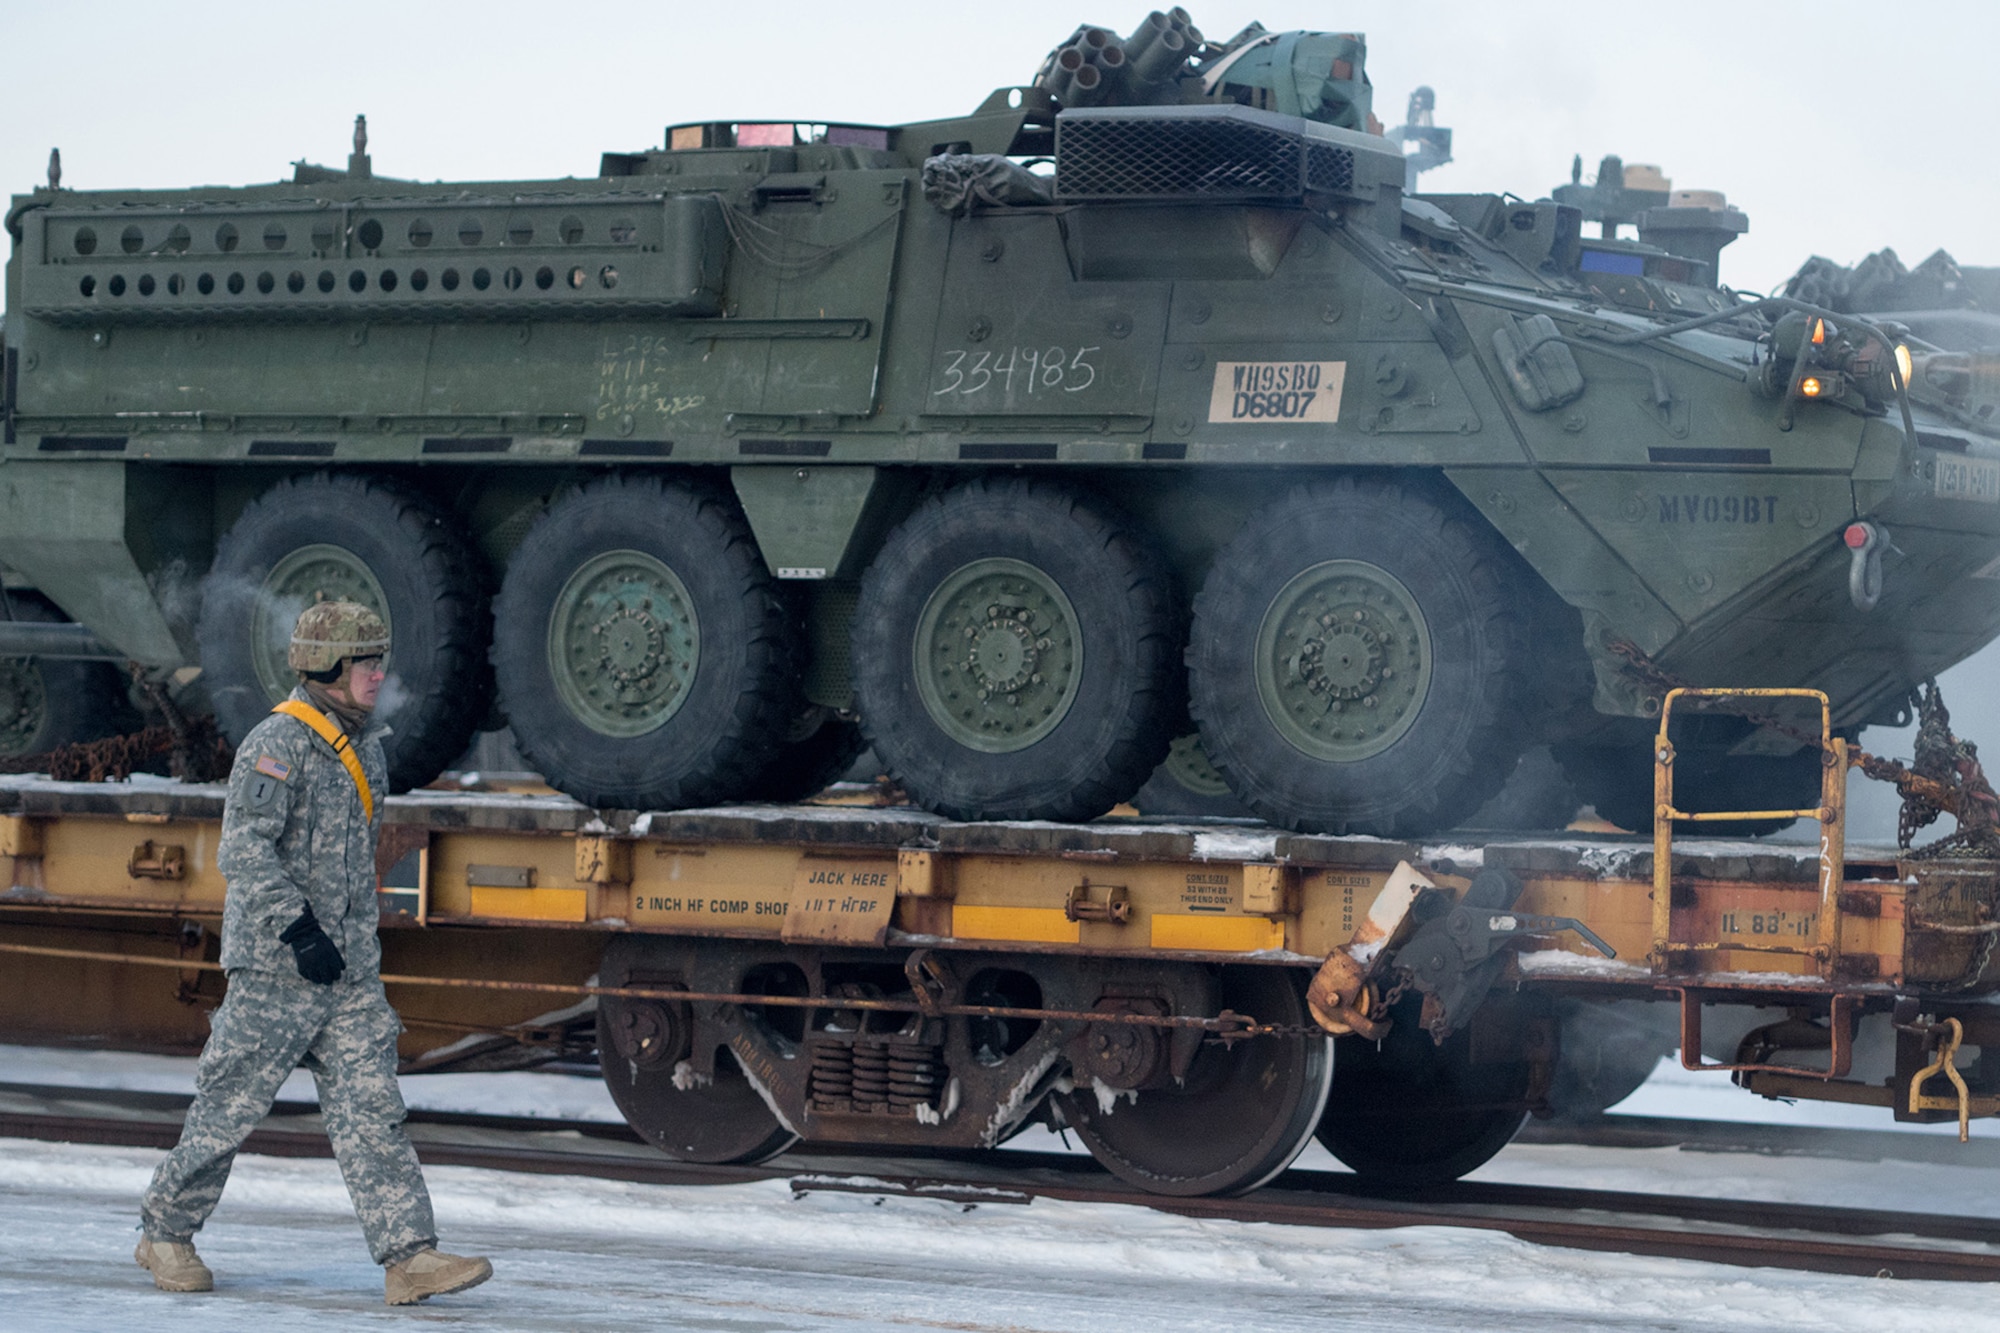 Soldiers assigned to the 1st Stryker Brigade Combat Team, 25th Infantry Division, U.S. Army Alaska, perform railhead operations in sub-zero temperatures on Joint Base Elmendorf-Richardson, Alaska, Jan. 30, 2018.  The Fort Wainwright-based Soldiers are off-loading their vehicles and equipment as part of Arctic Thrust, a short-notice rapid deployment exercise.